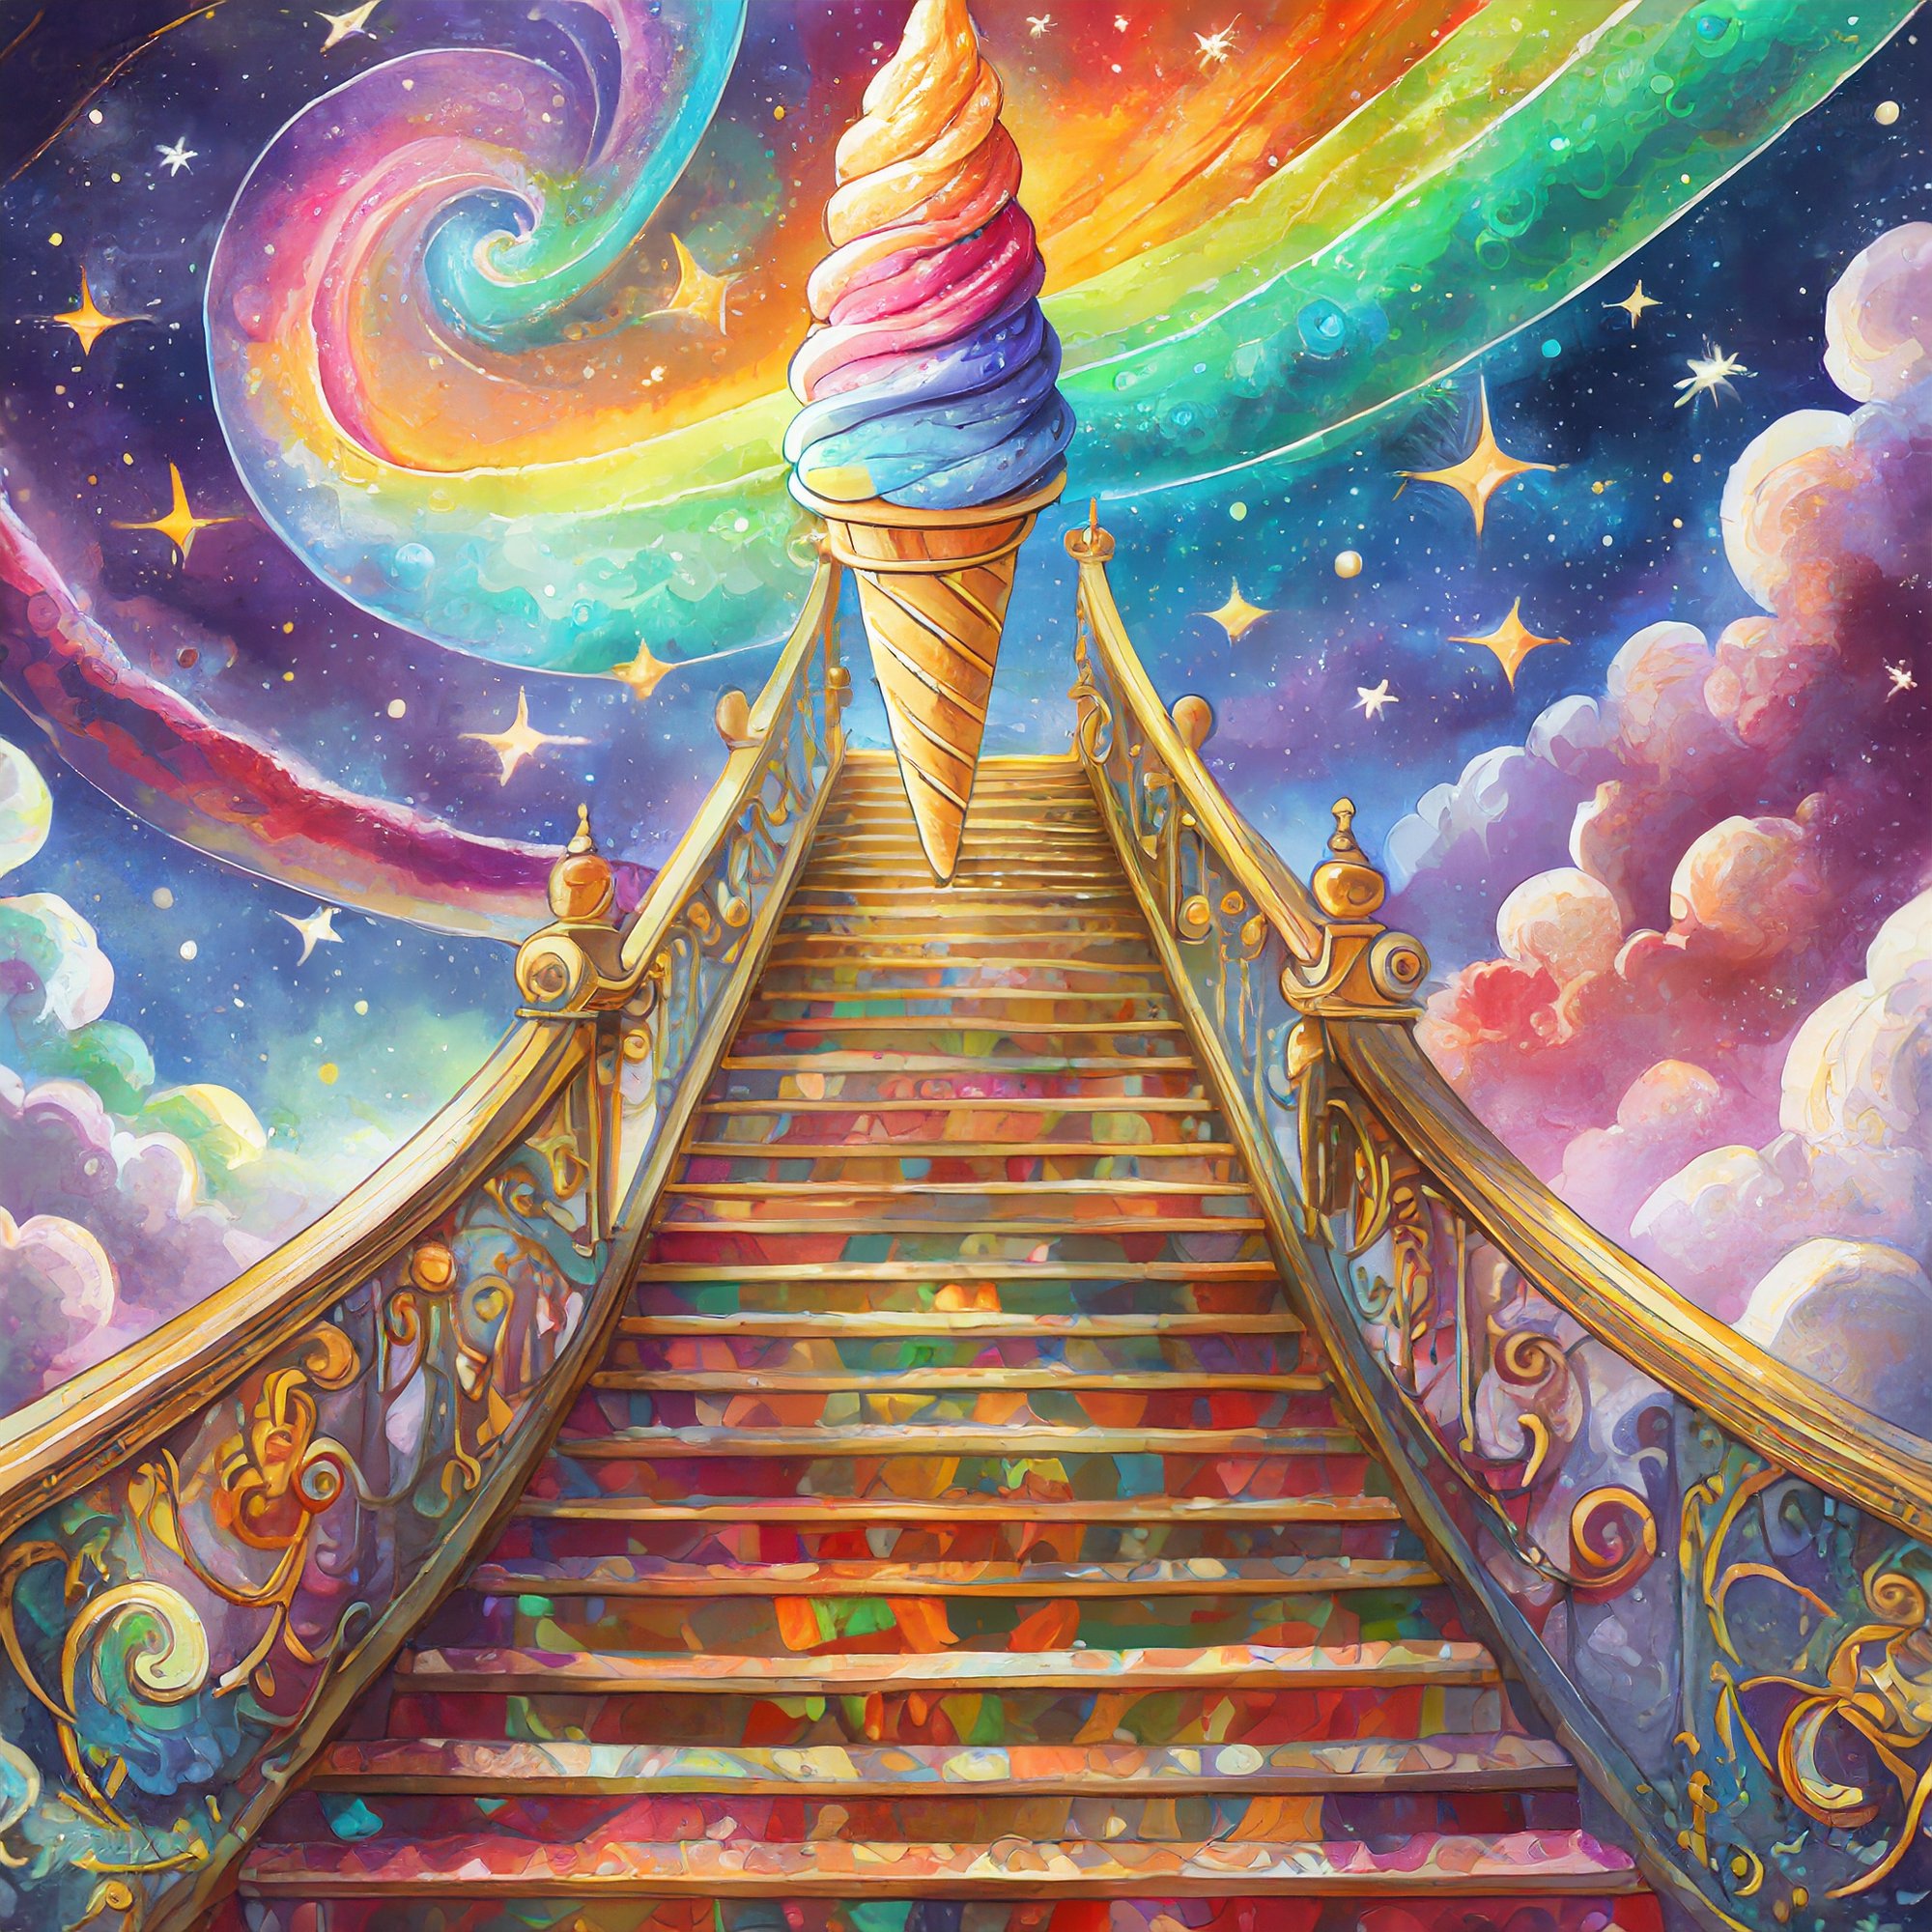 Firefly stairway up to galaxy, universe, & stars in heaven and place an sugar cone rainbow icre crea (1)-1